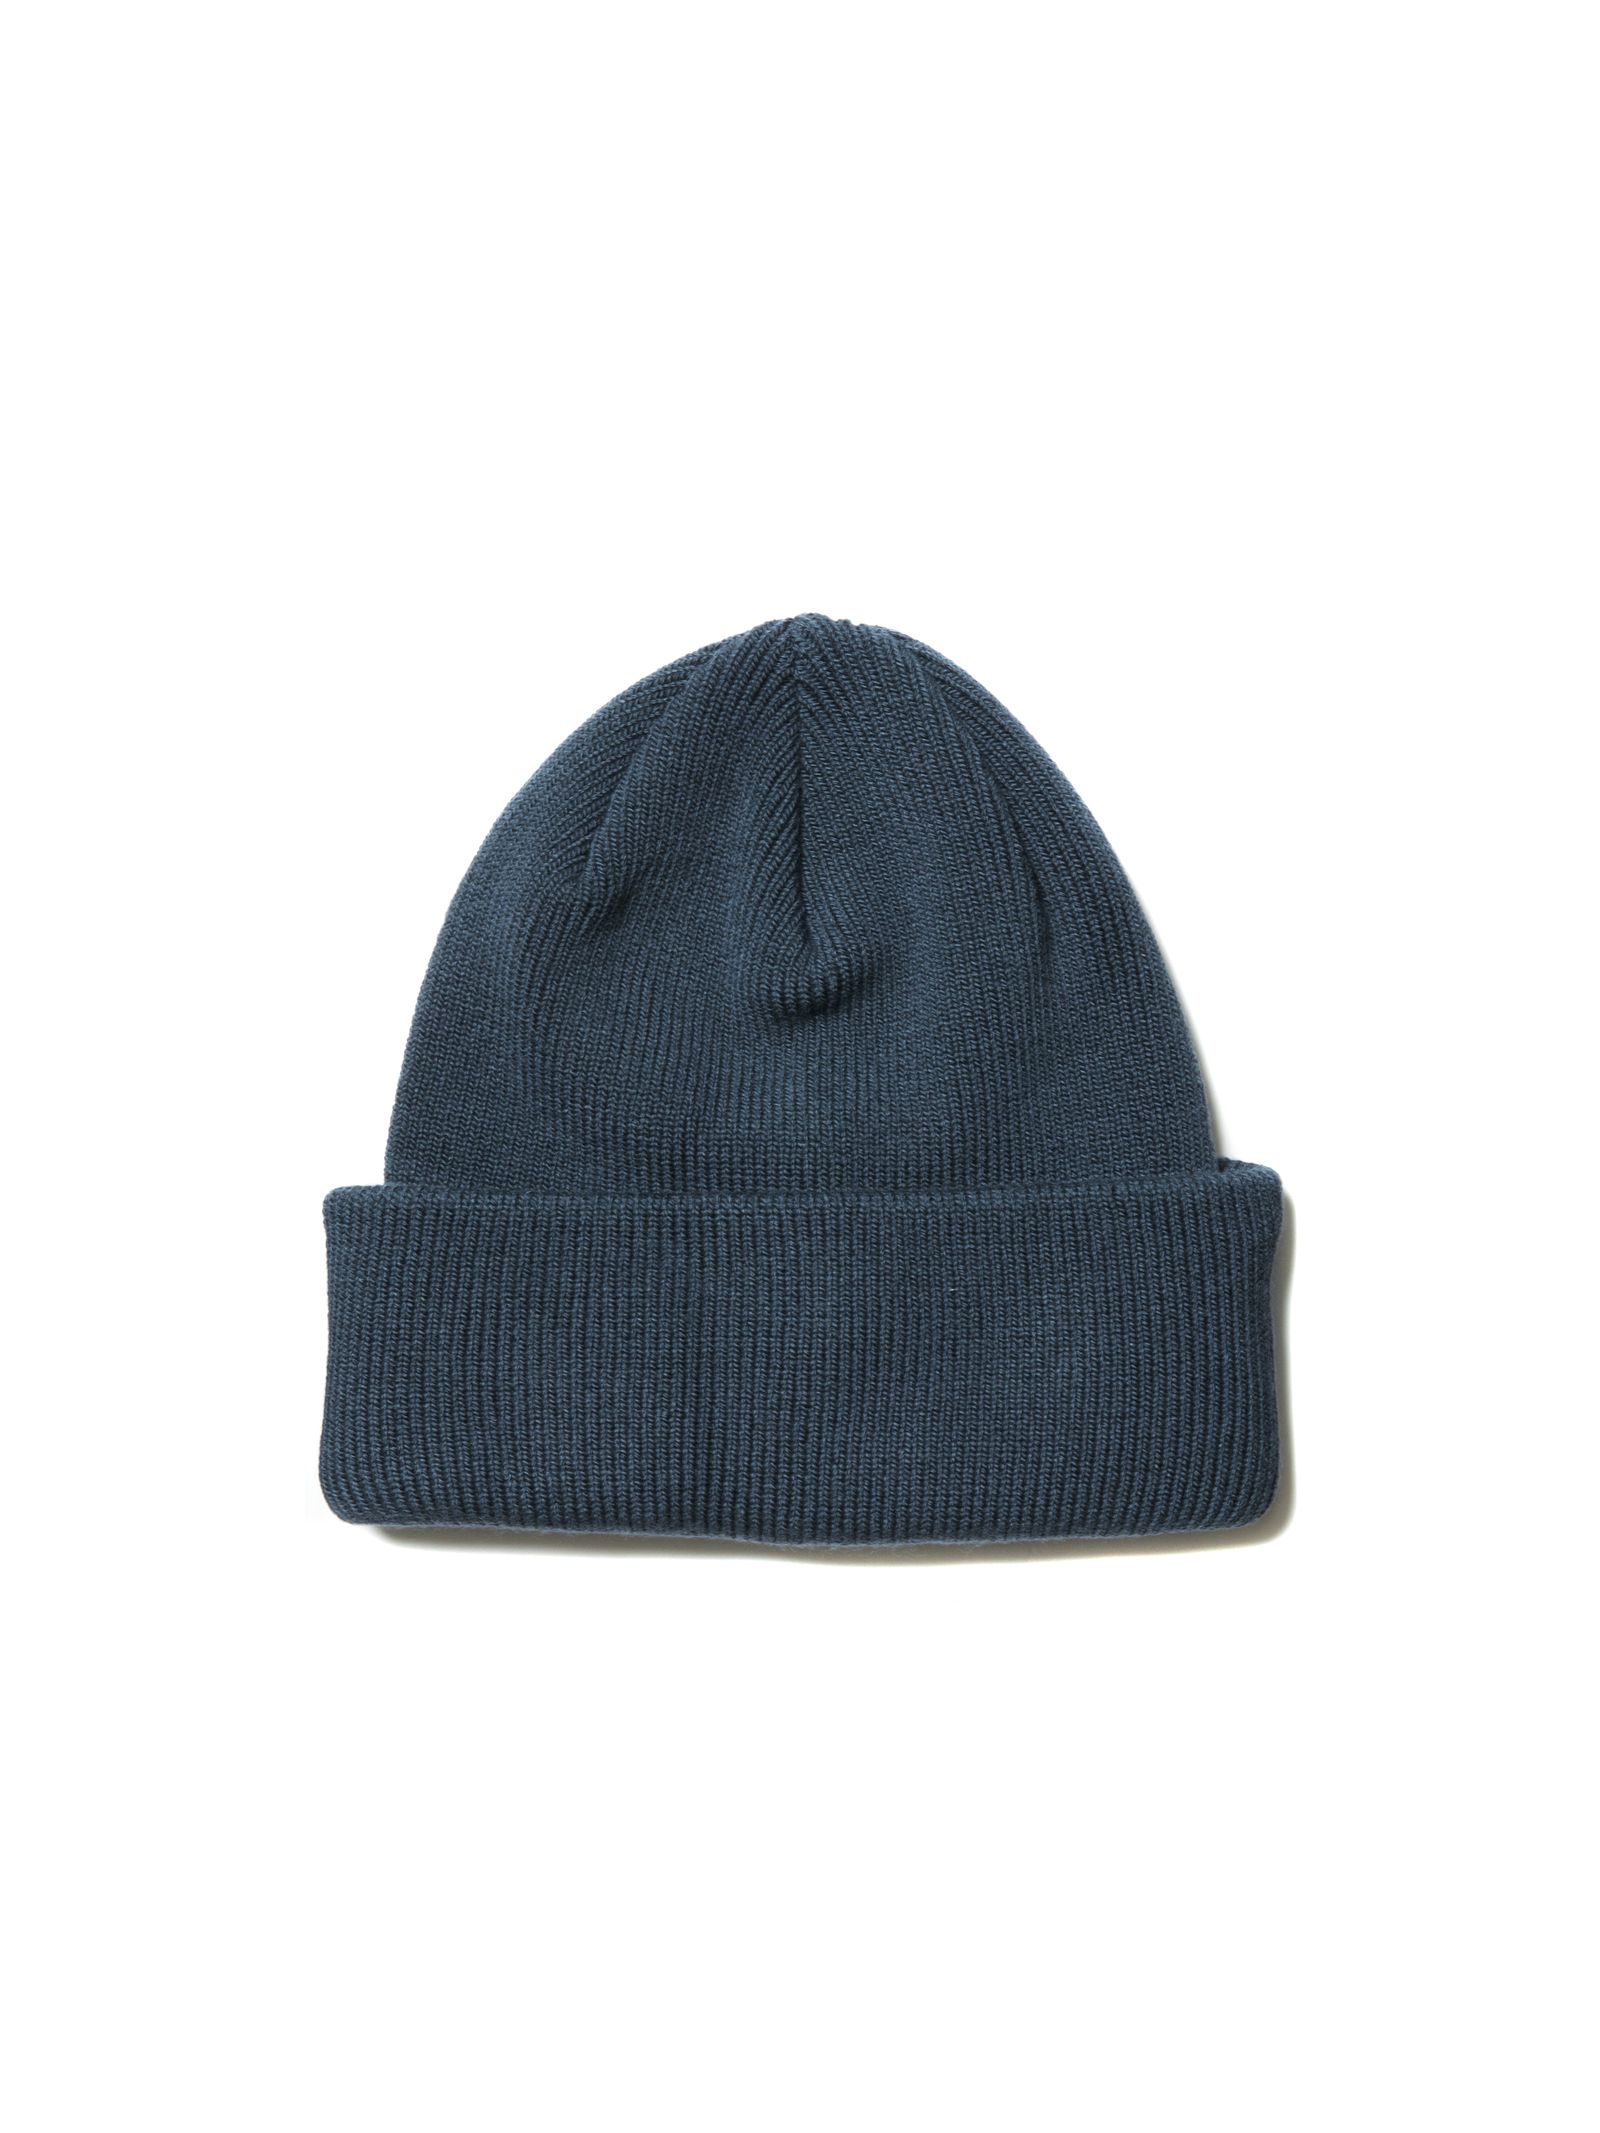 COOTIE PRODUCTIONS - 【ラスト1点】S/R Cuffed Beanie (SMOKE NAVY 